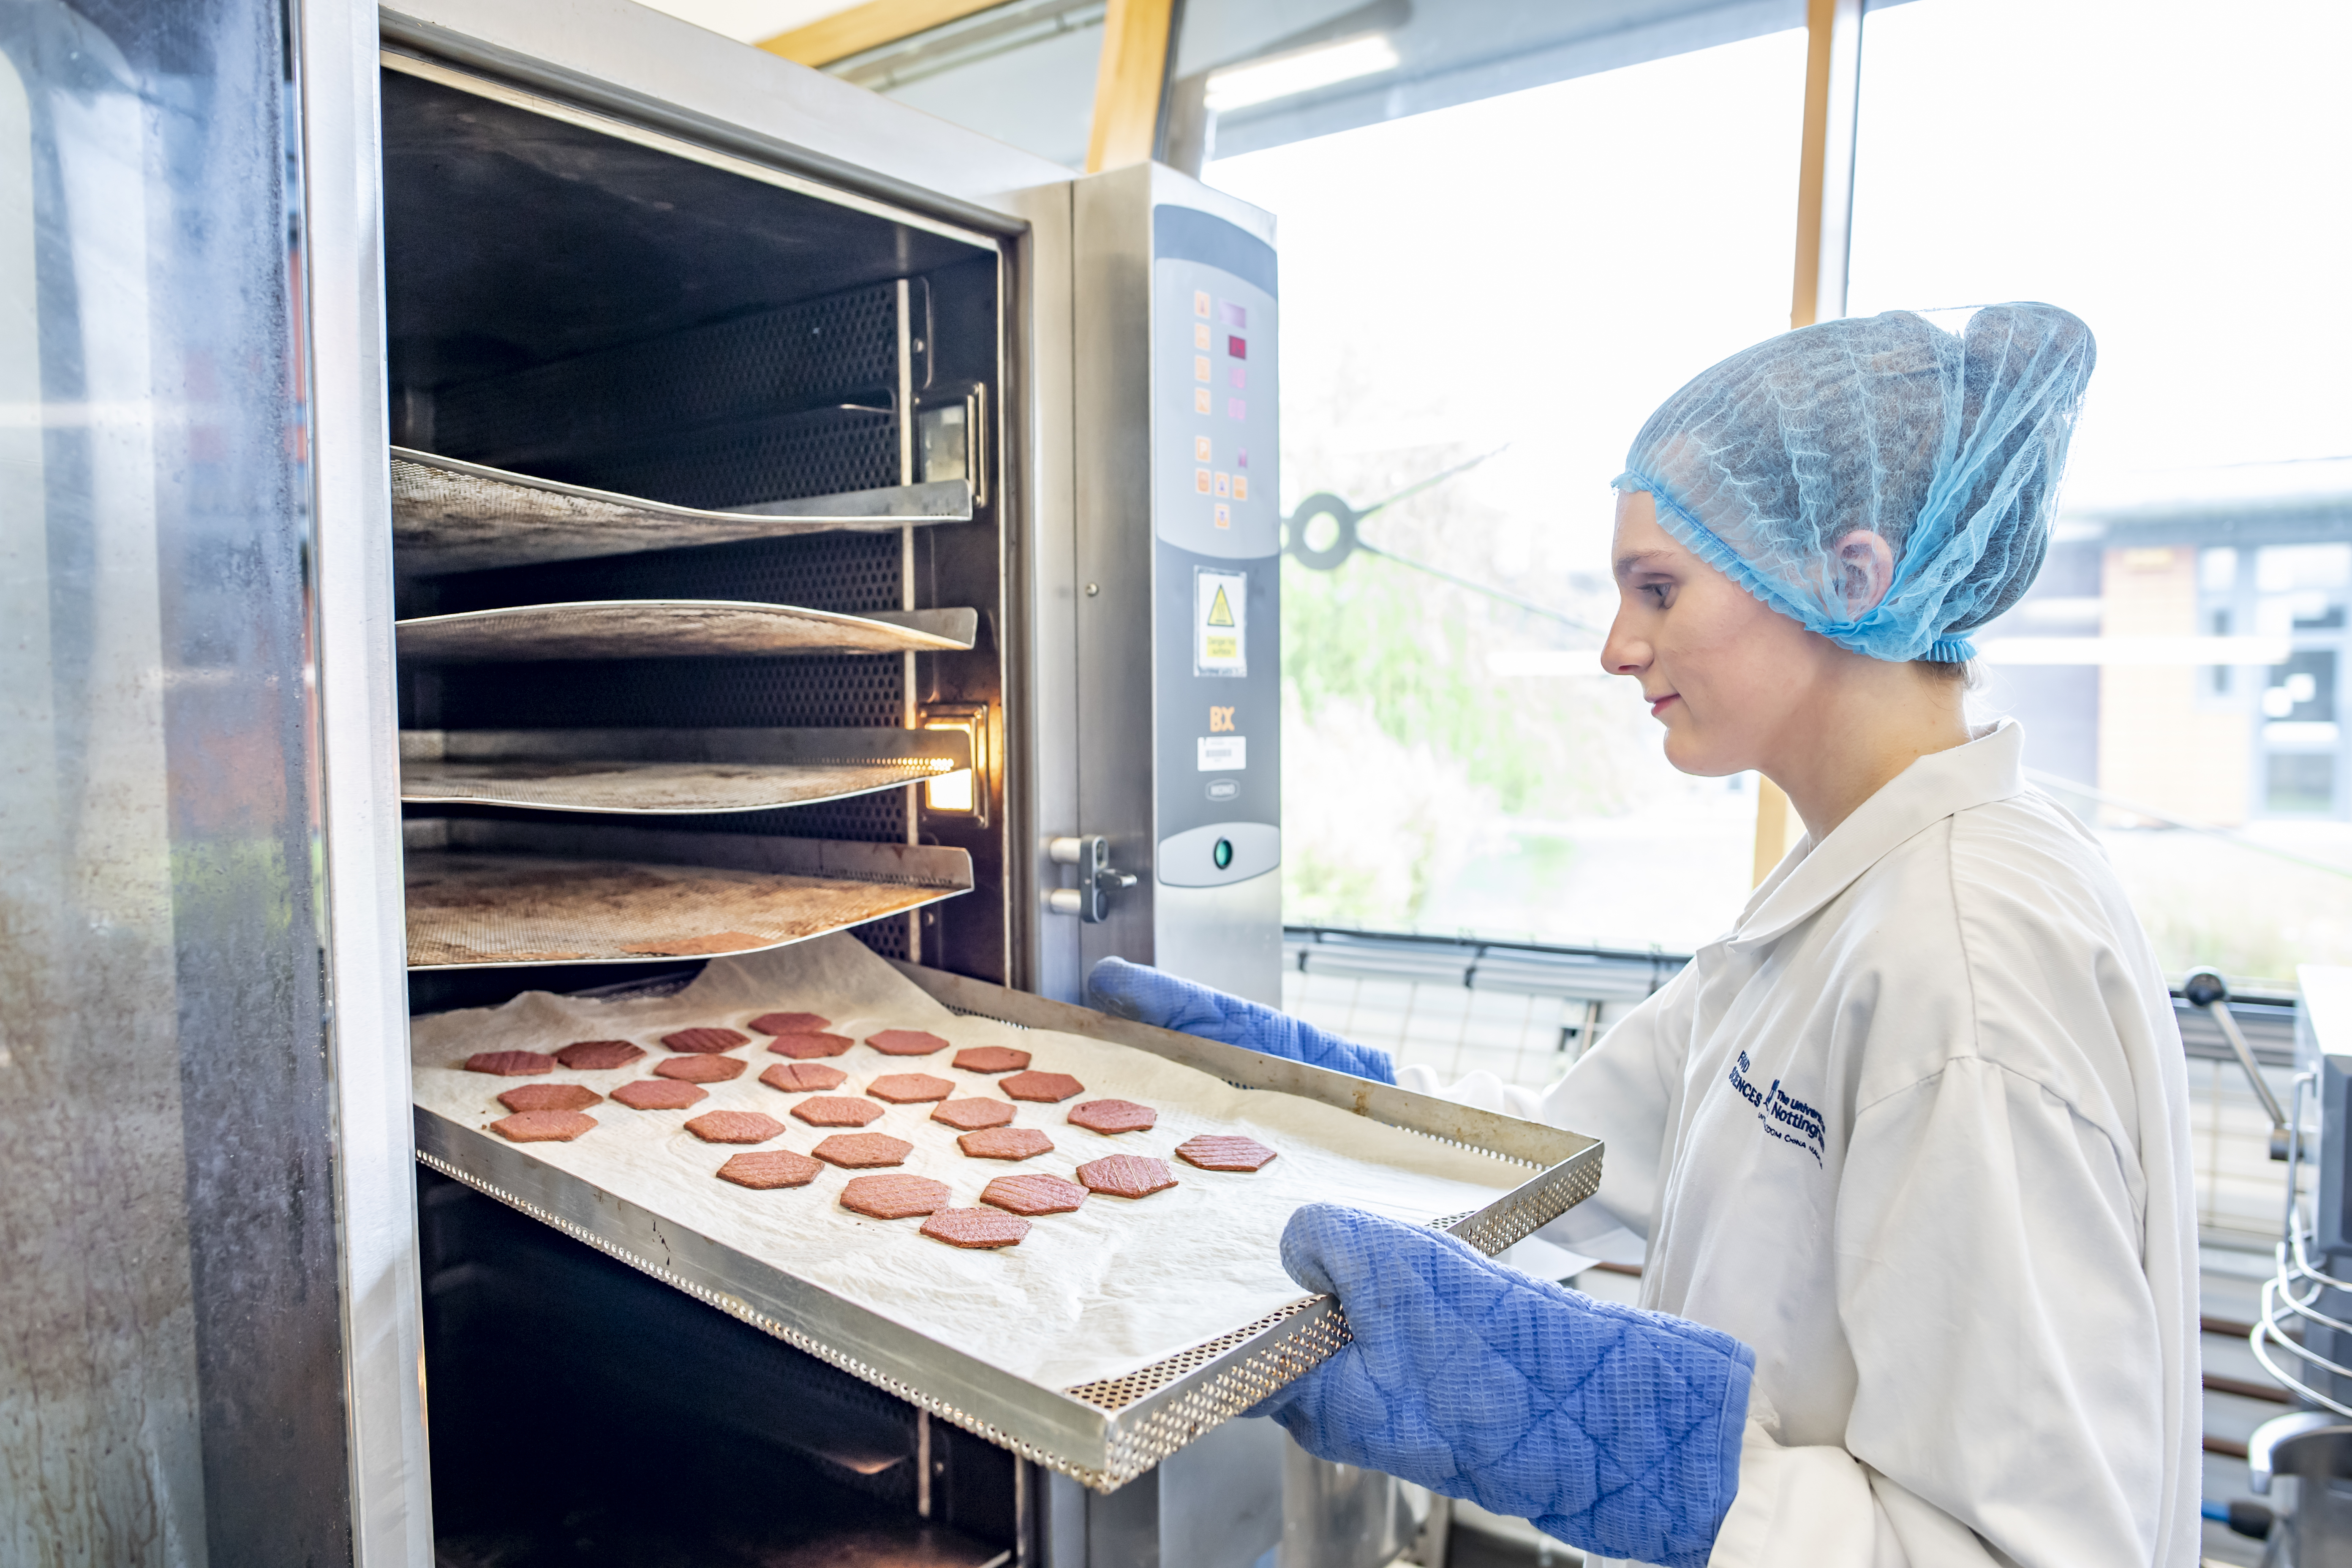 Undergraduate student Katherine Tolson taking baked products from an oven wearing lab coat, hair net and oven gloves